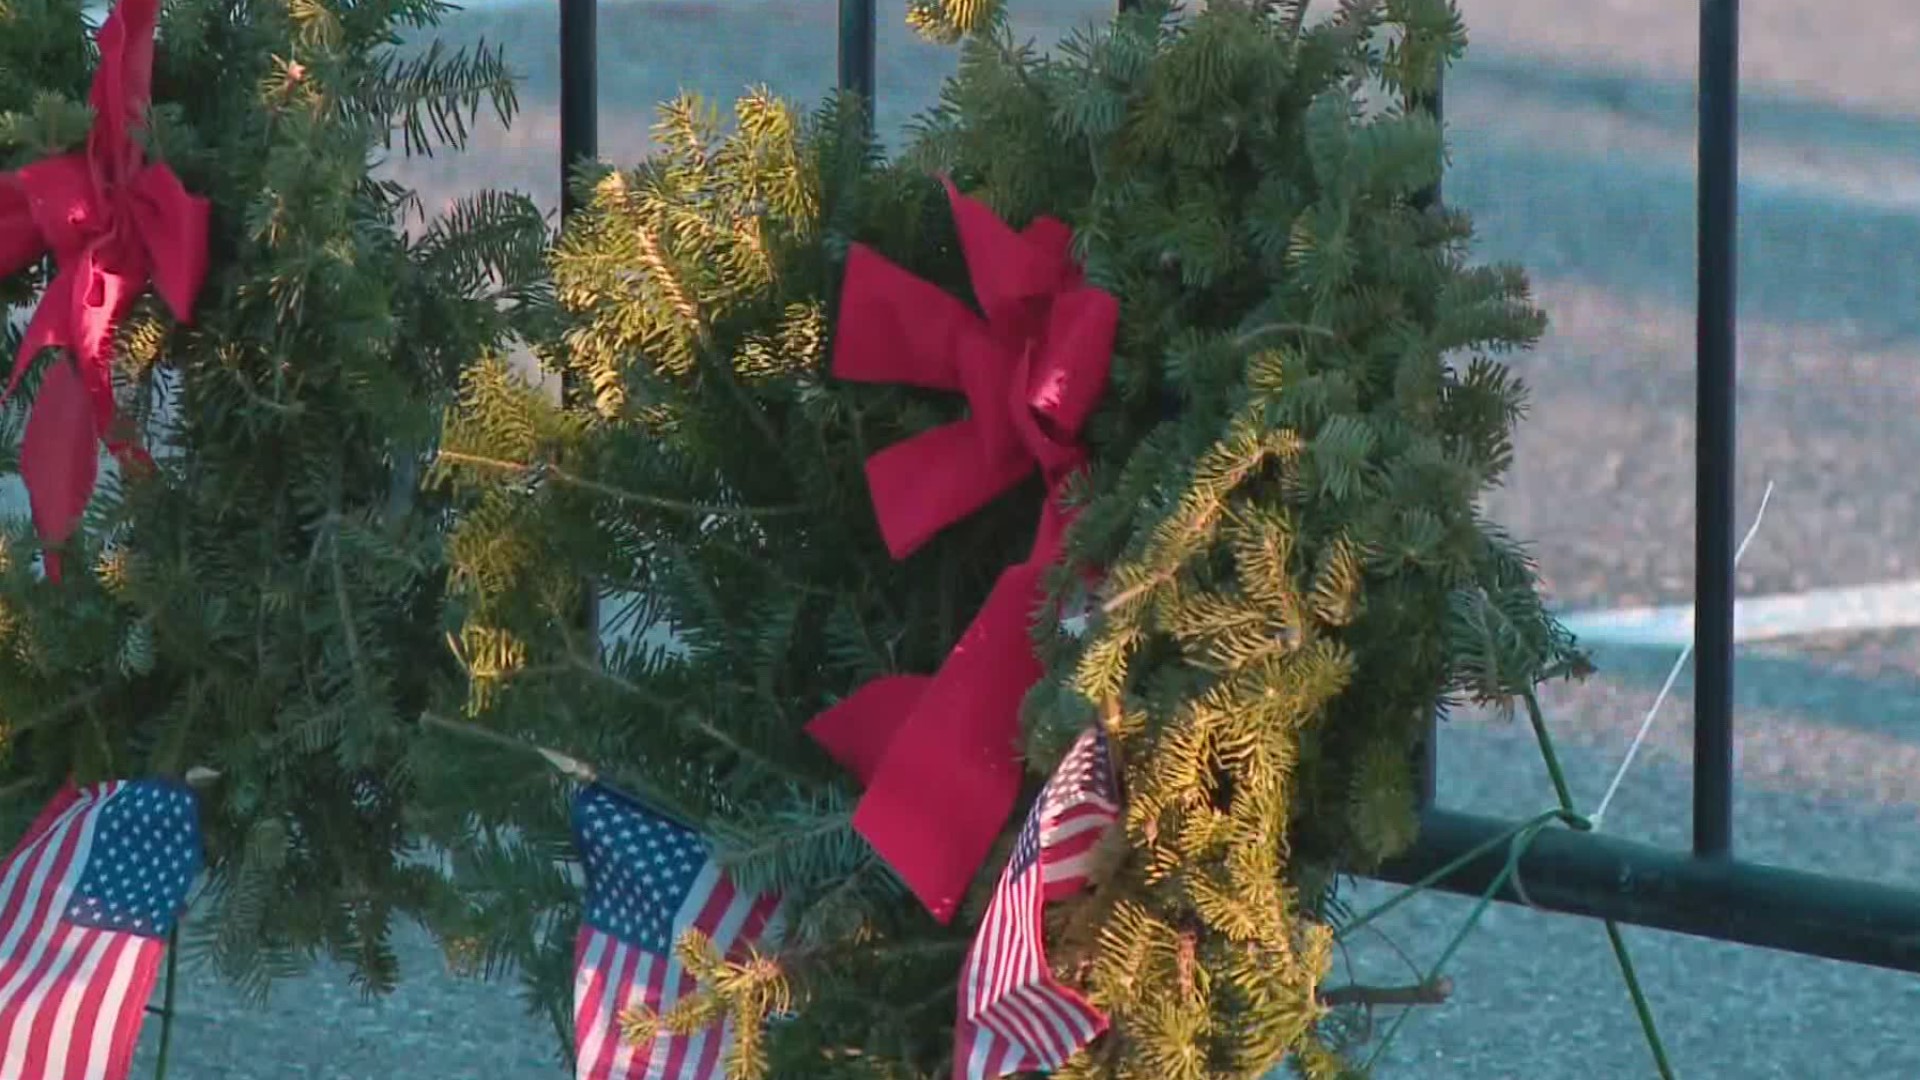 The Wreaths Across America convoy made a stop on Portland today on it's way to Arlington National Cemetery, despite almost being shut down due to the pandemic.